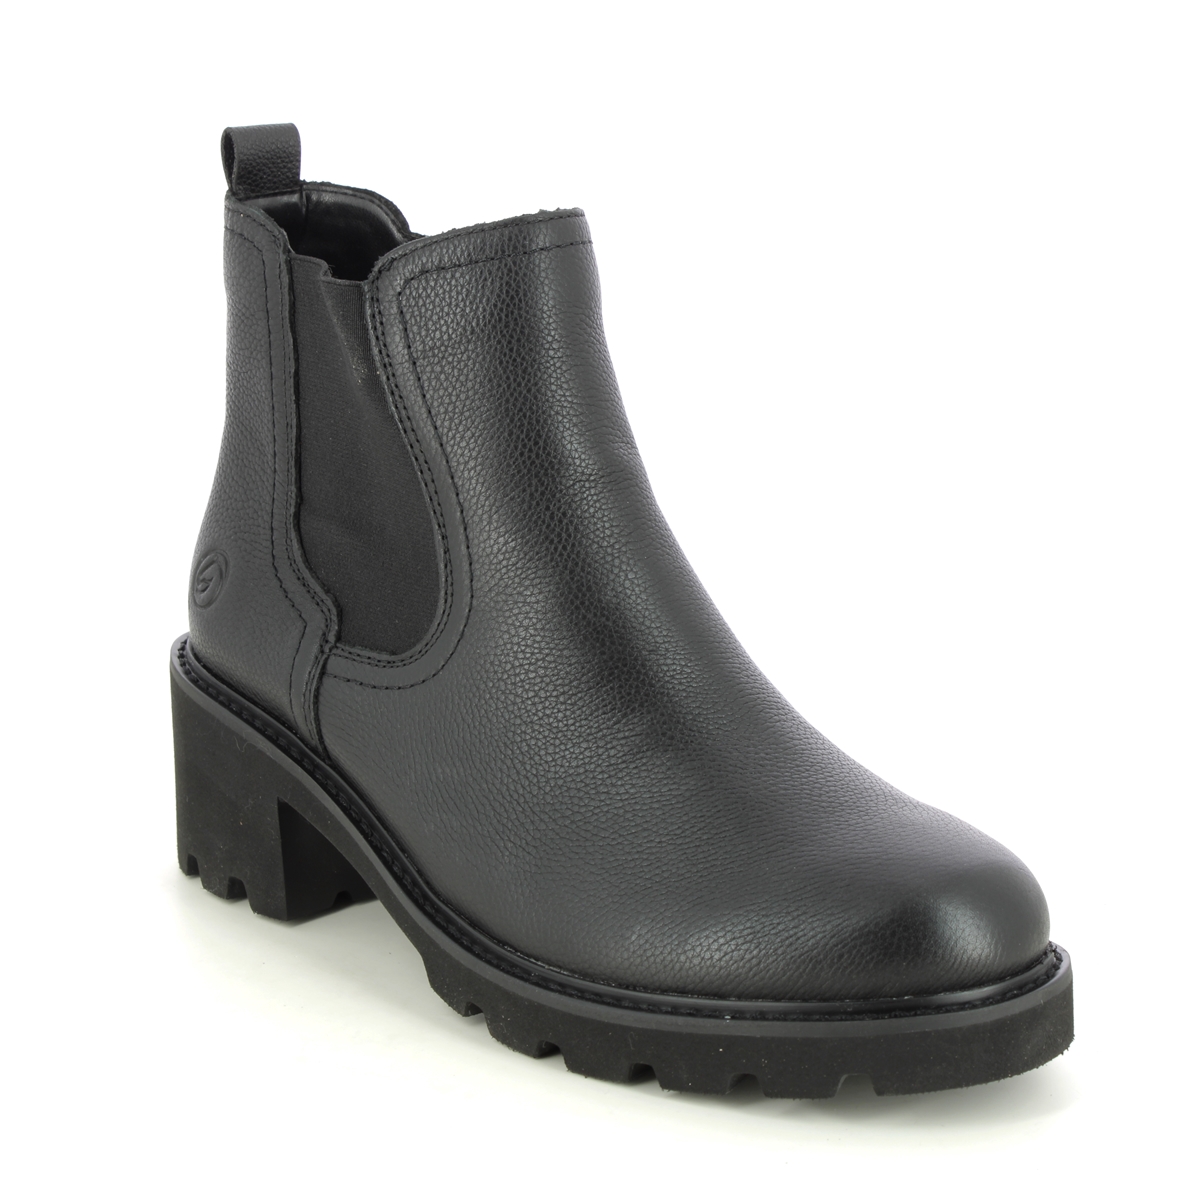 Remonte Bodochel Black Leather Womens Chelsea Boots D0A70-01 In Size 42 In Plain Black Leather